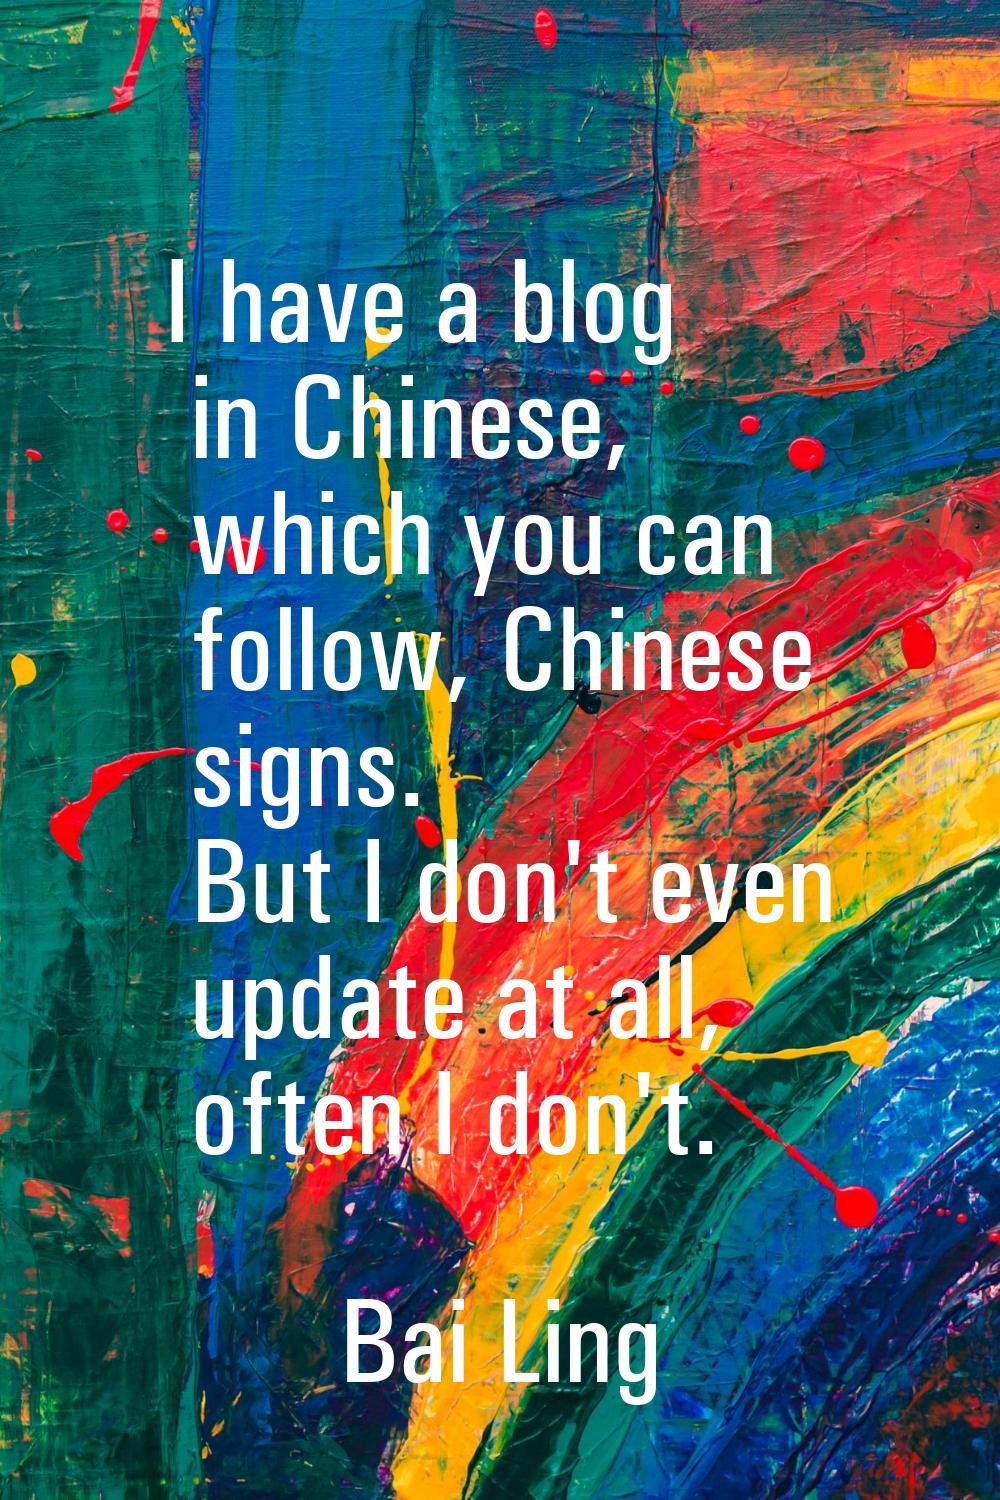 I have a blog in Chinese, which you can follow, Chinese signs. But I don't even update at all, ofte